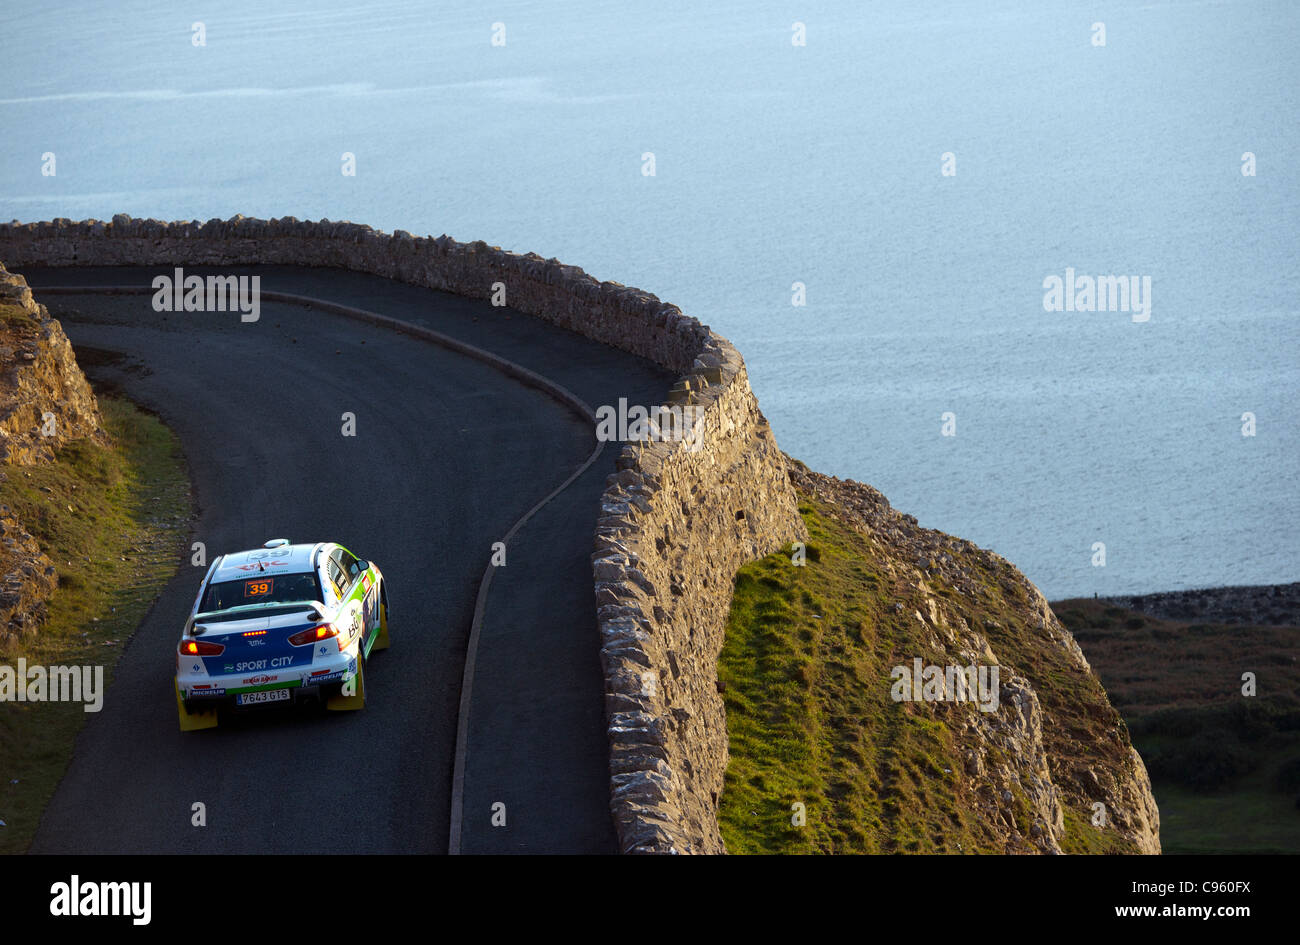 A rally car is seen during a stage of the Rally of Wales GBR November 2011 Stock Photo